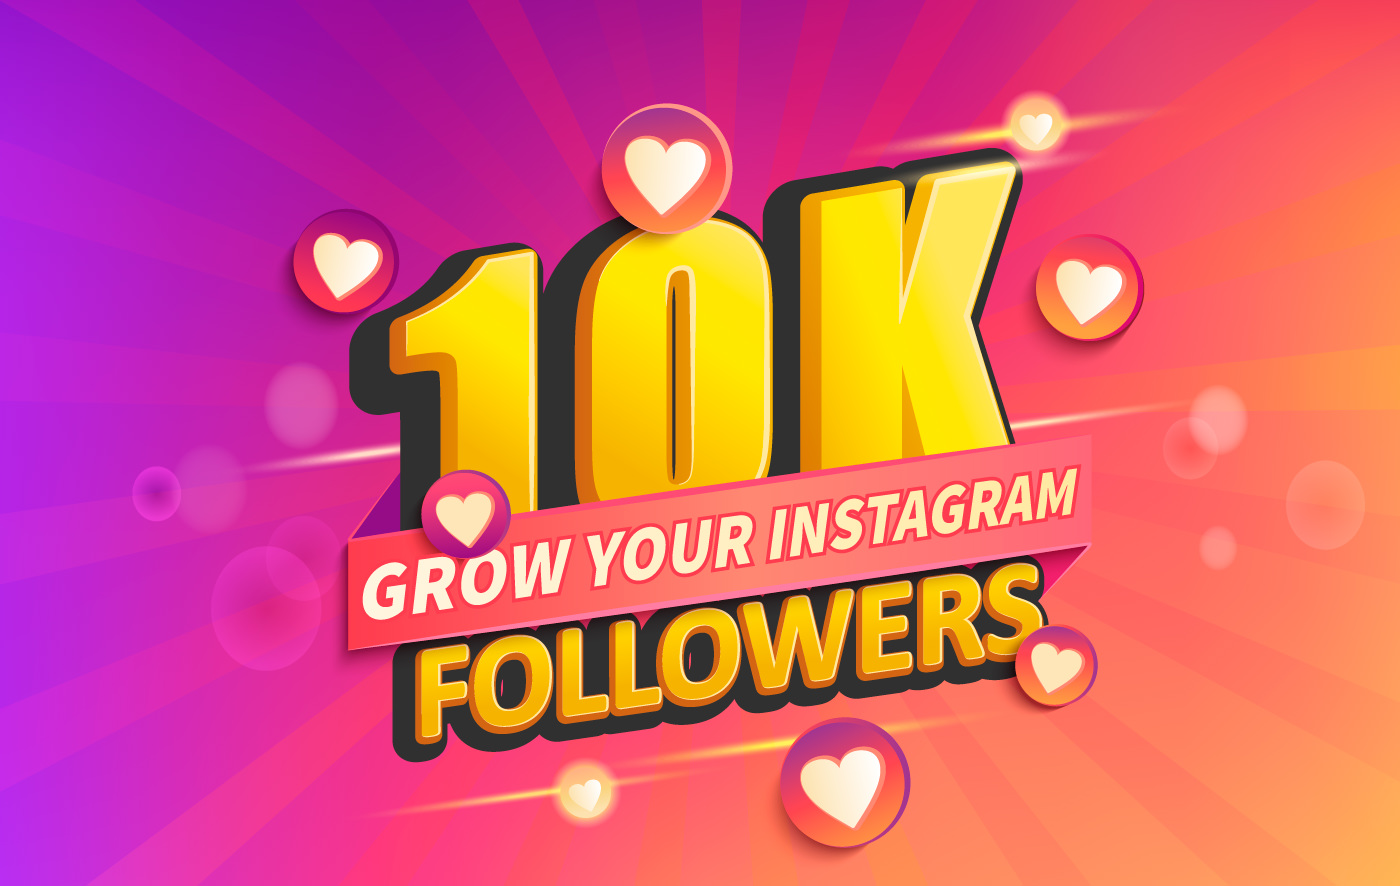 phlearn magazine7 tips to grow your instagram account to 10k followers - instagram tips how to get your first 1 000 followers